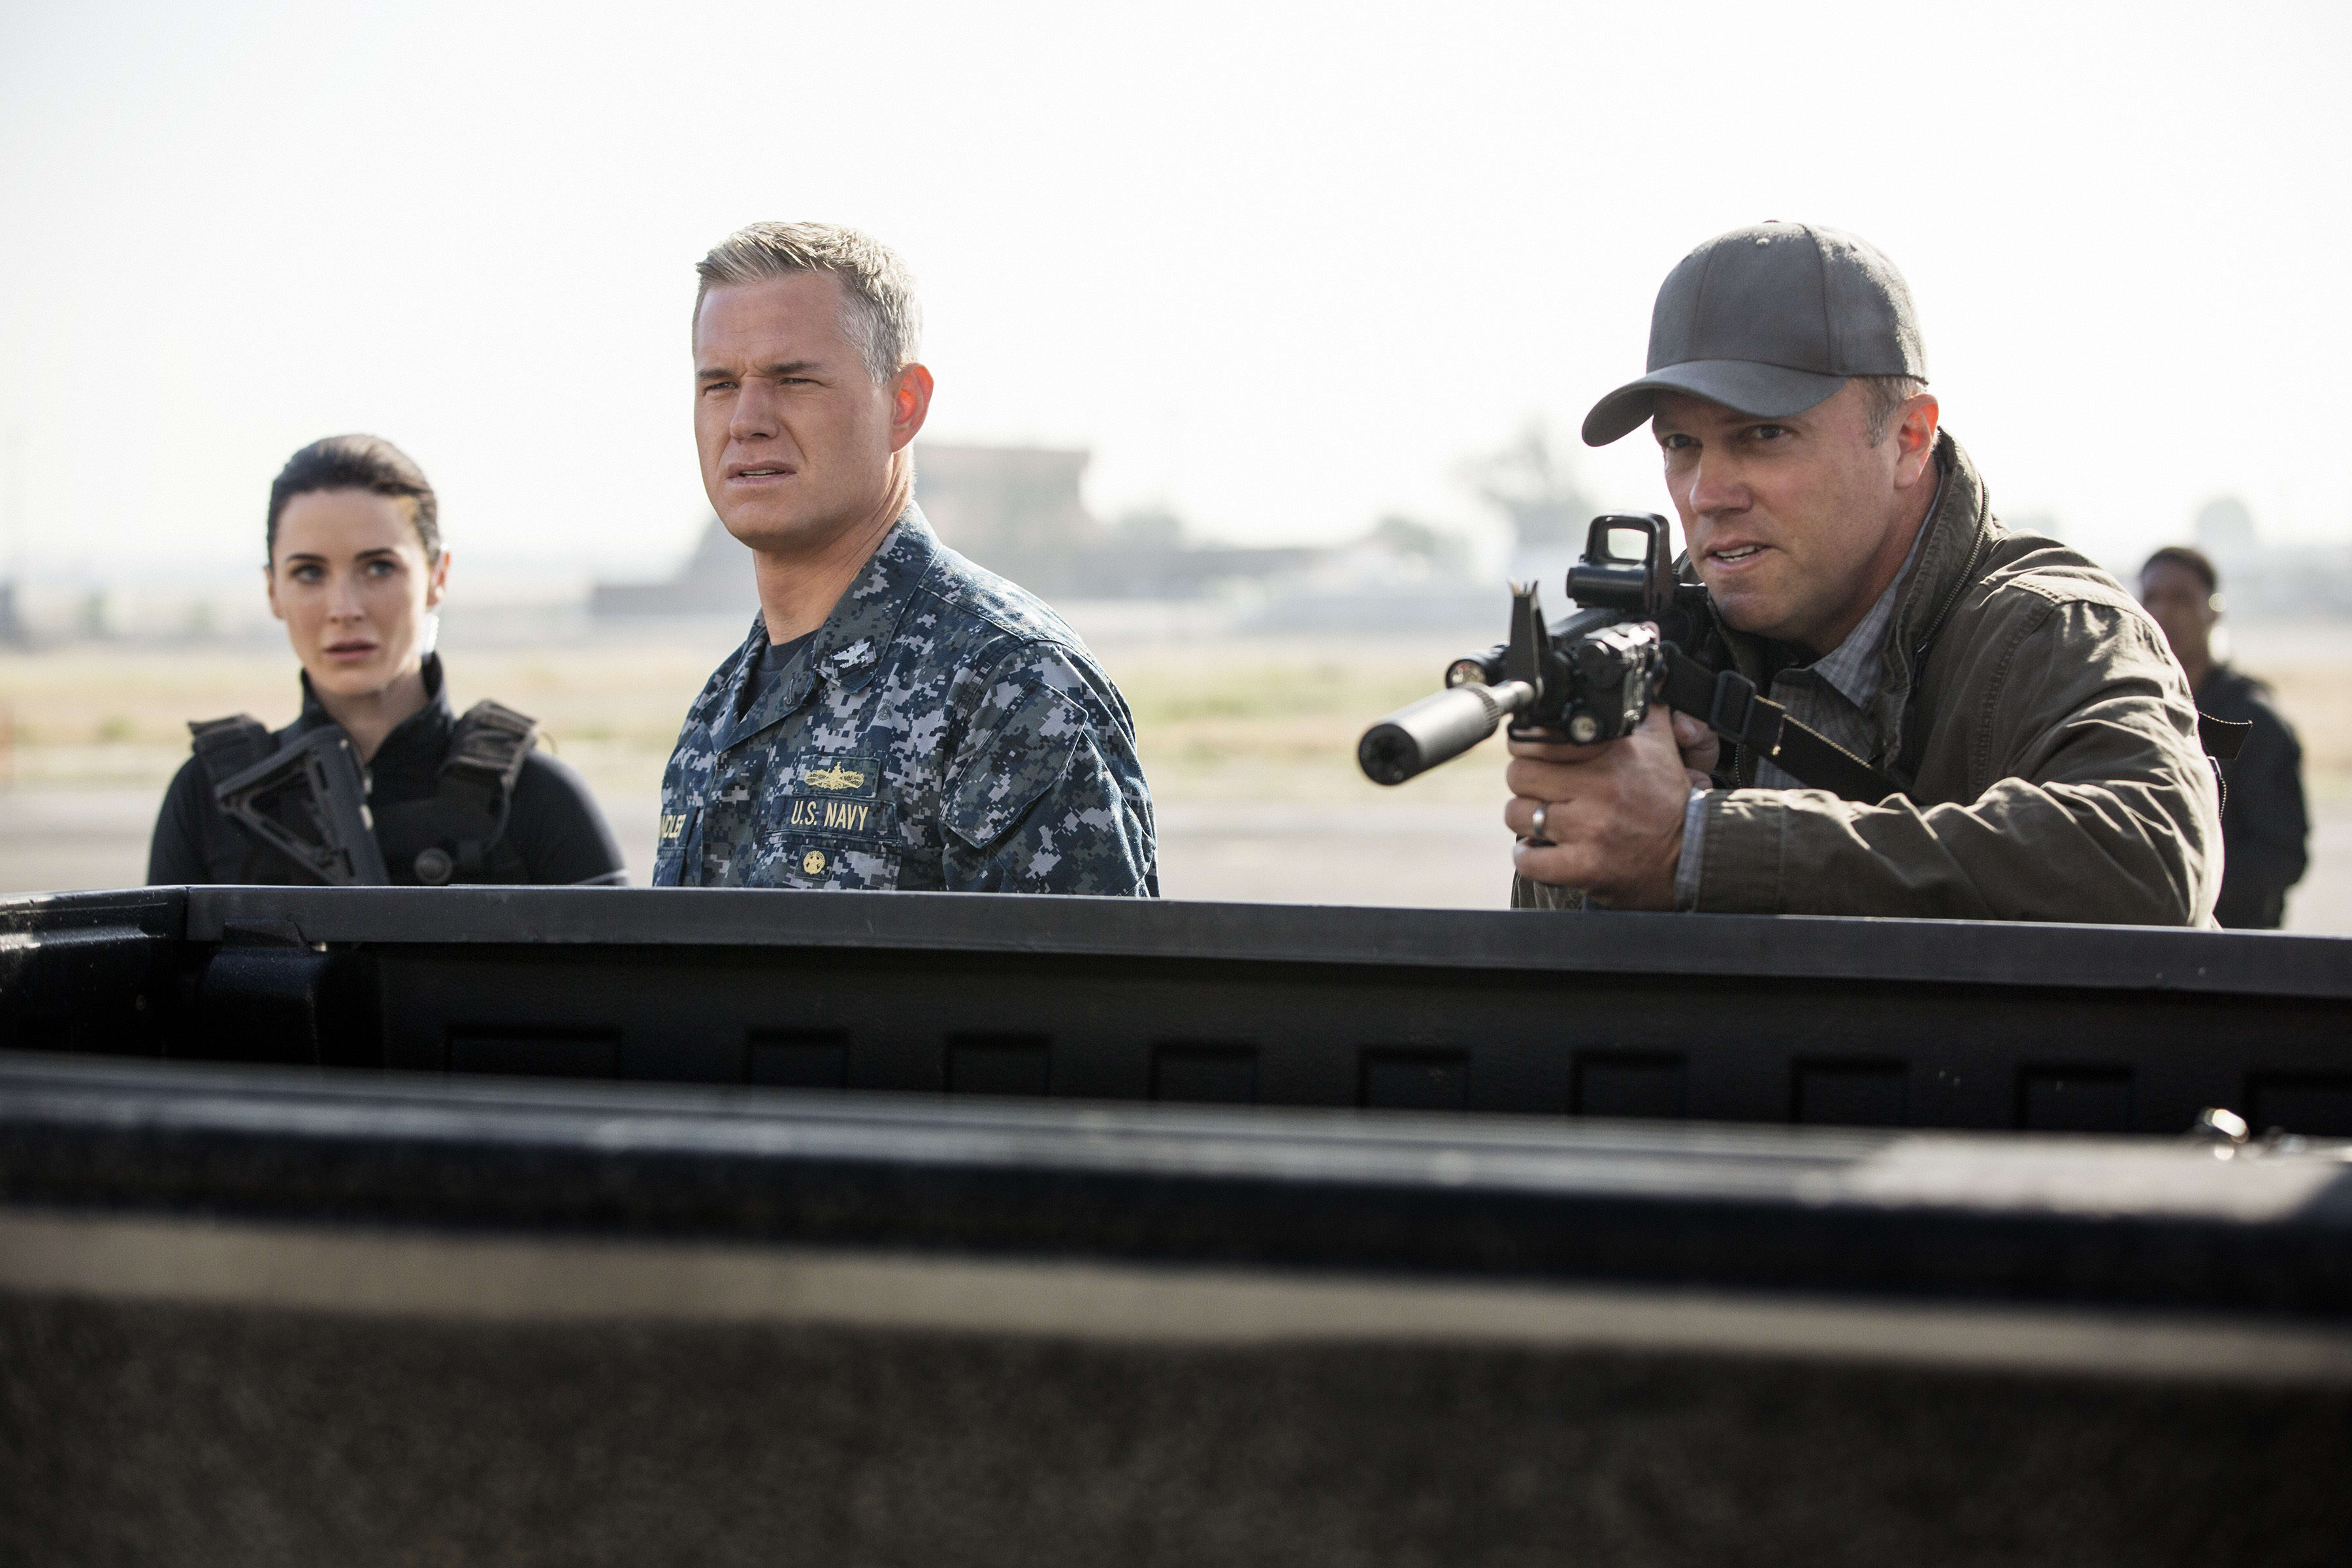 TV Review: 'The Last Ship' – The Hollywood Reporter